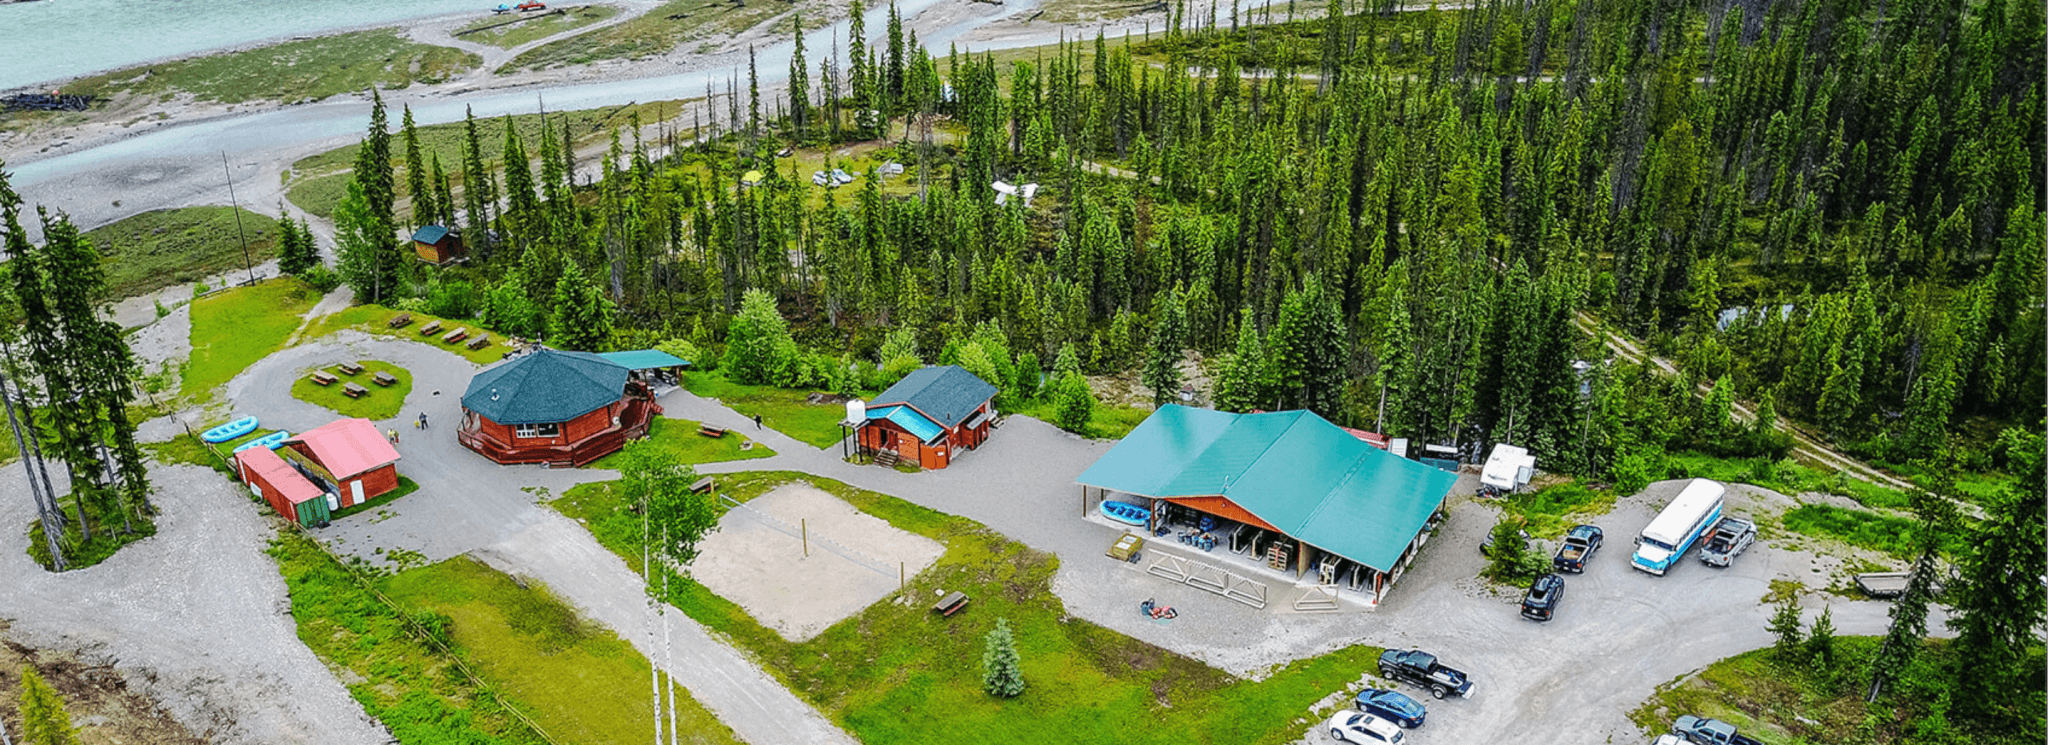 Bird's eye view of the Hydra River Guides base for Kicking Horse River White Water Rafting